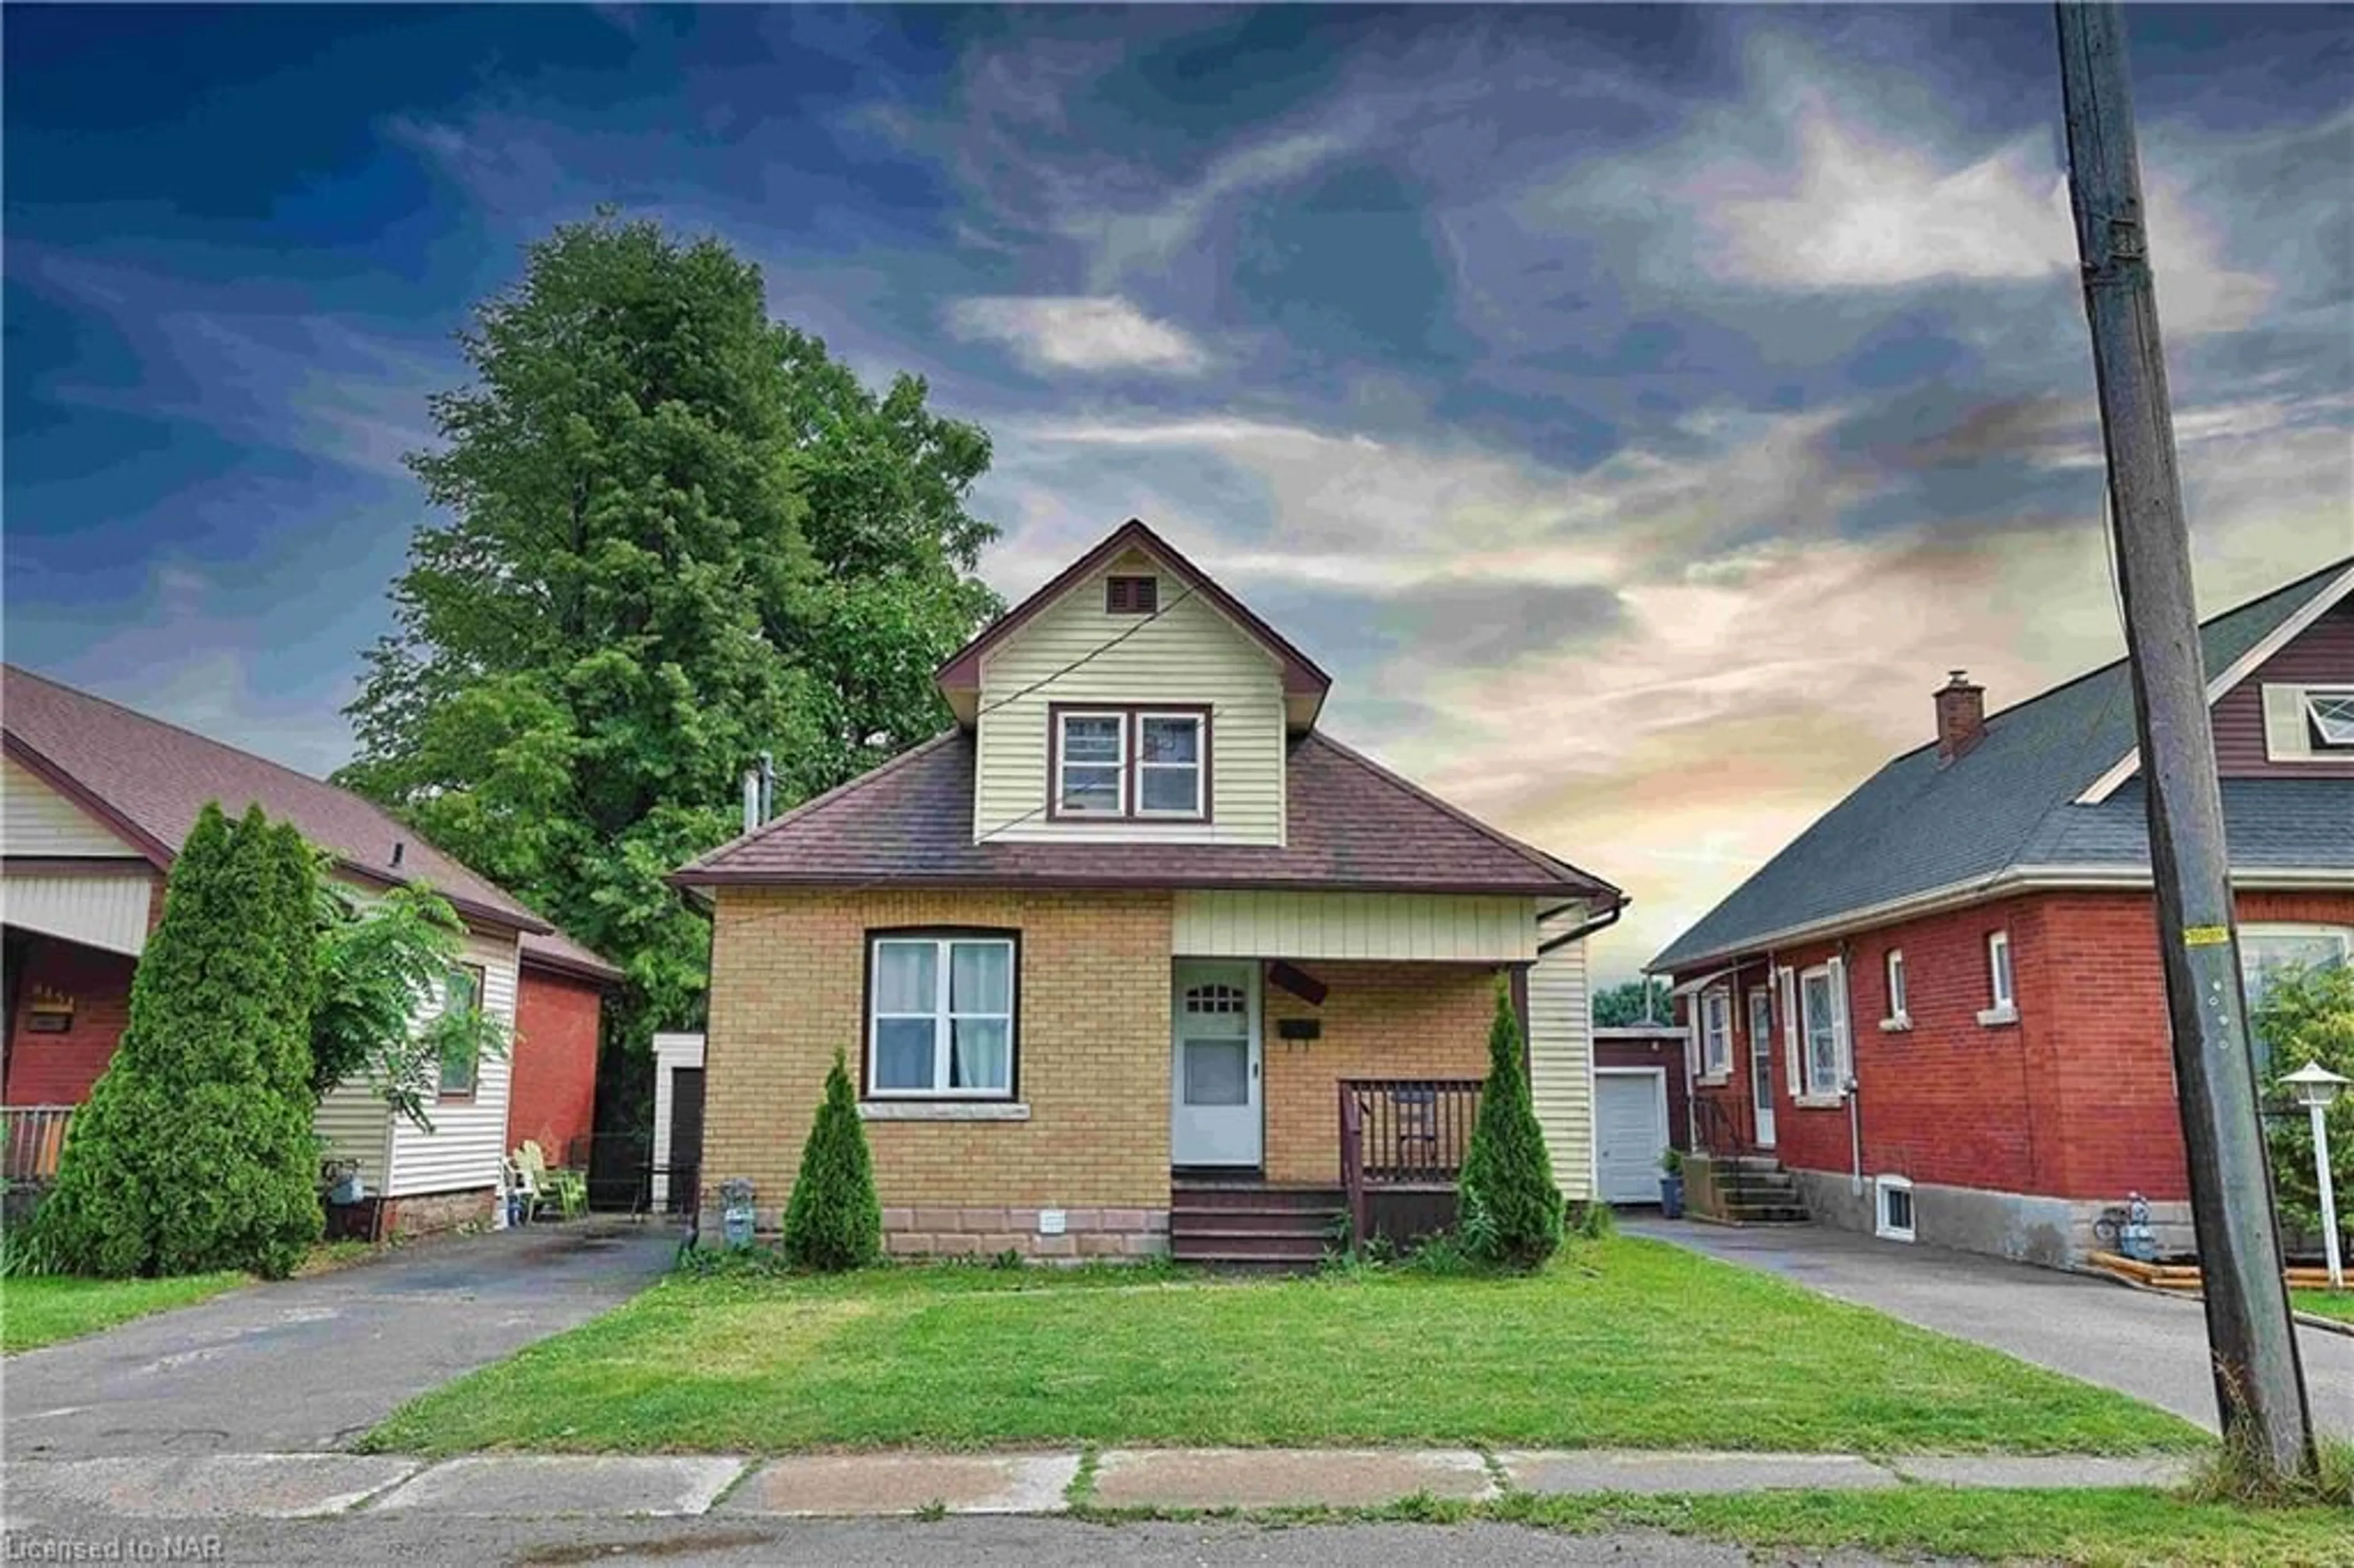 Frontside or backside of a home for 6462 Barker St, Niagara Falls Ontario L2G 1Y7